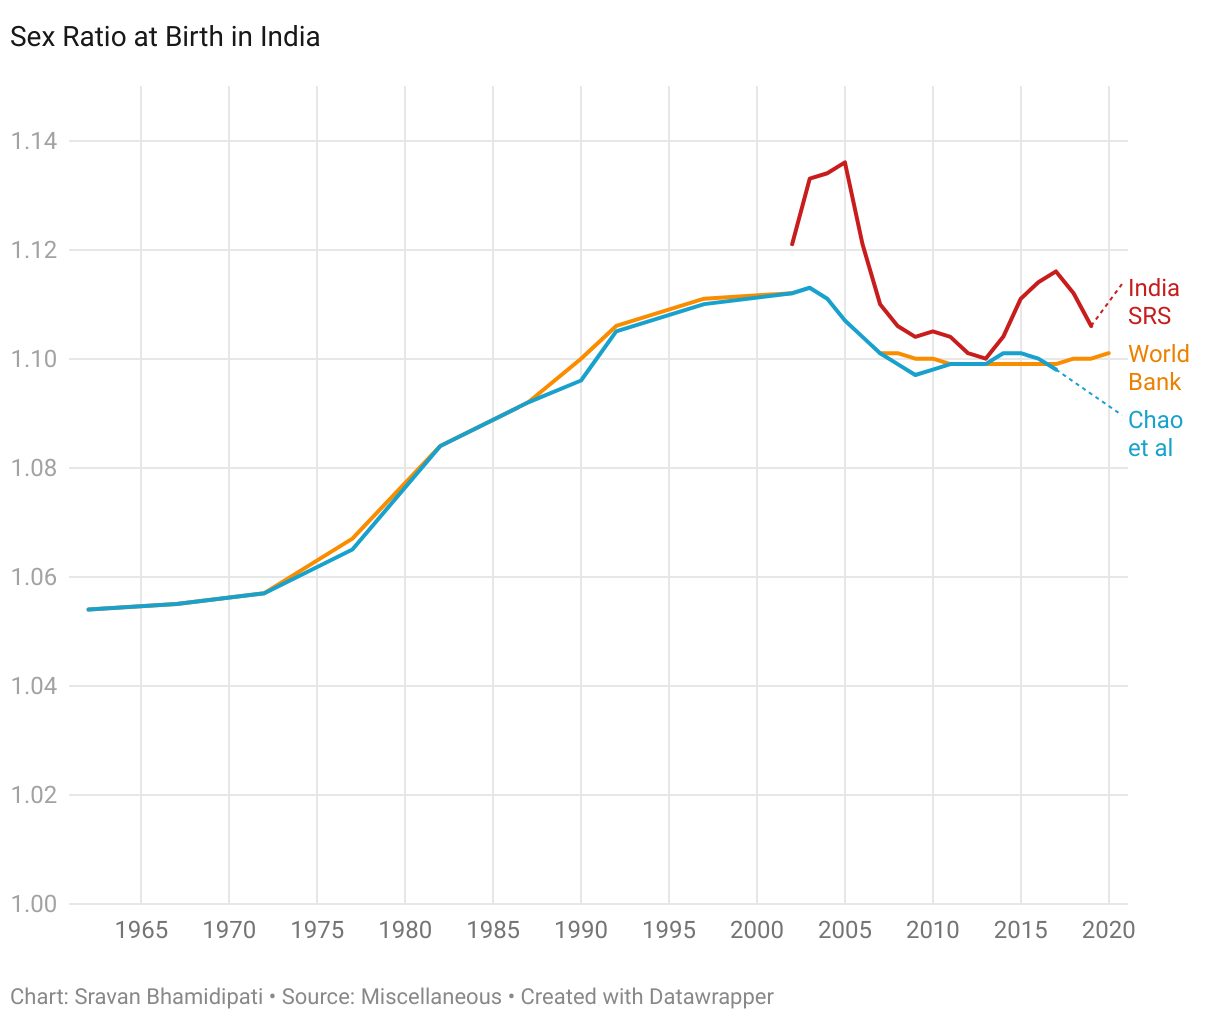 Sex ratio at birth in India, 1960 to 2020